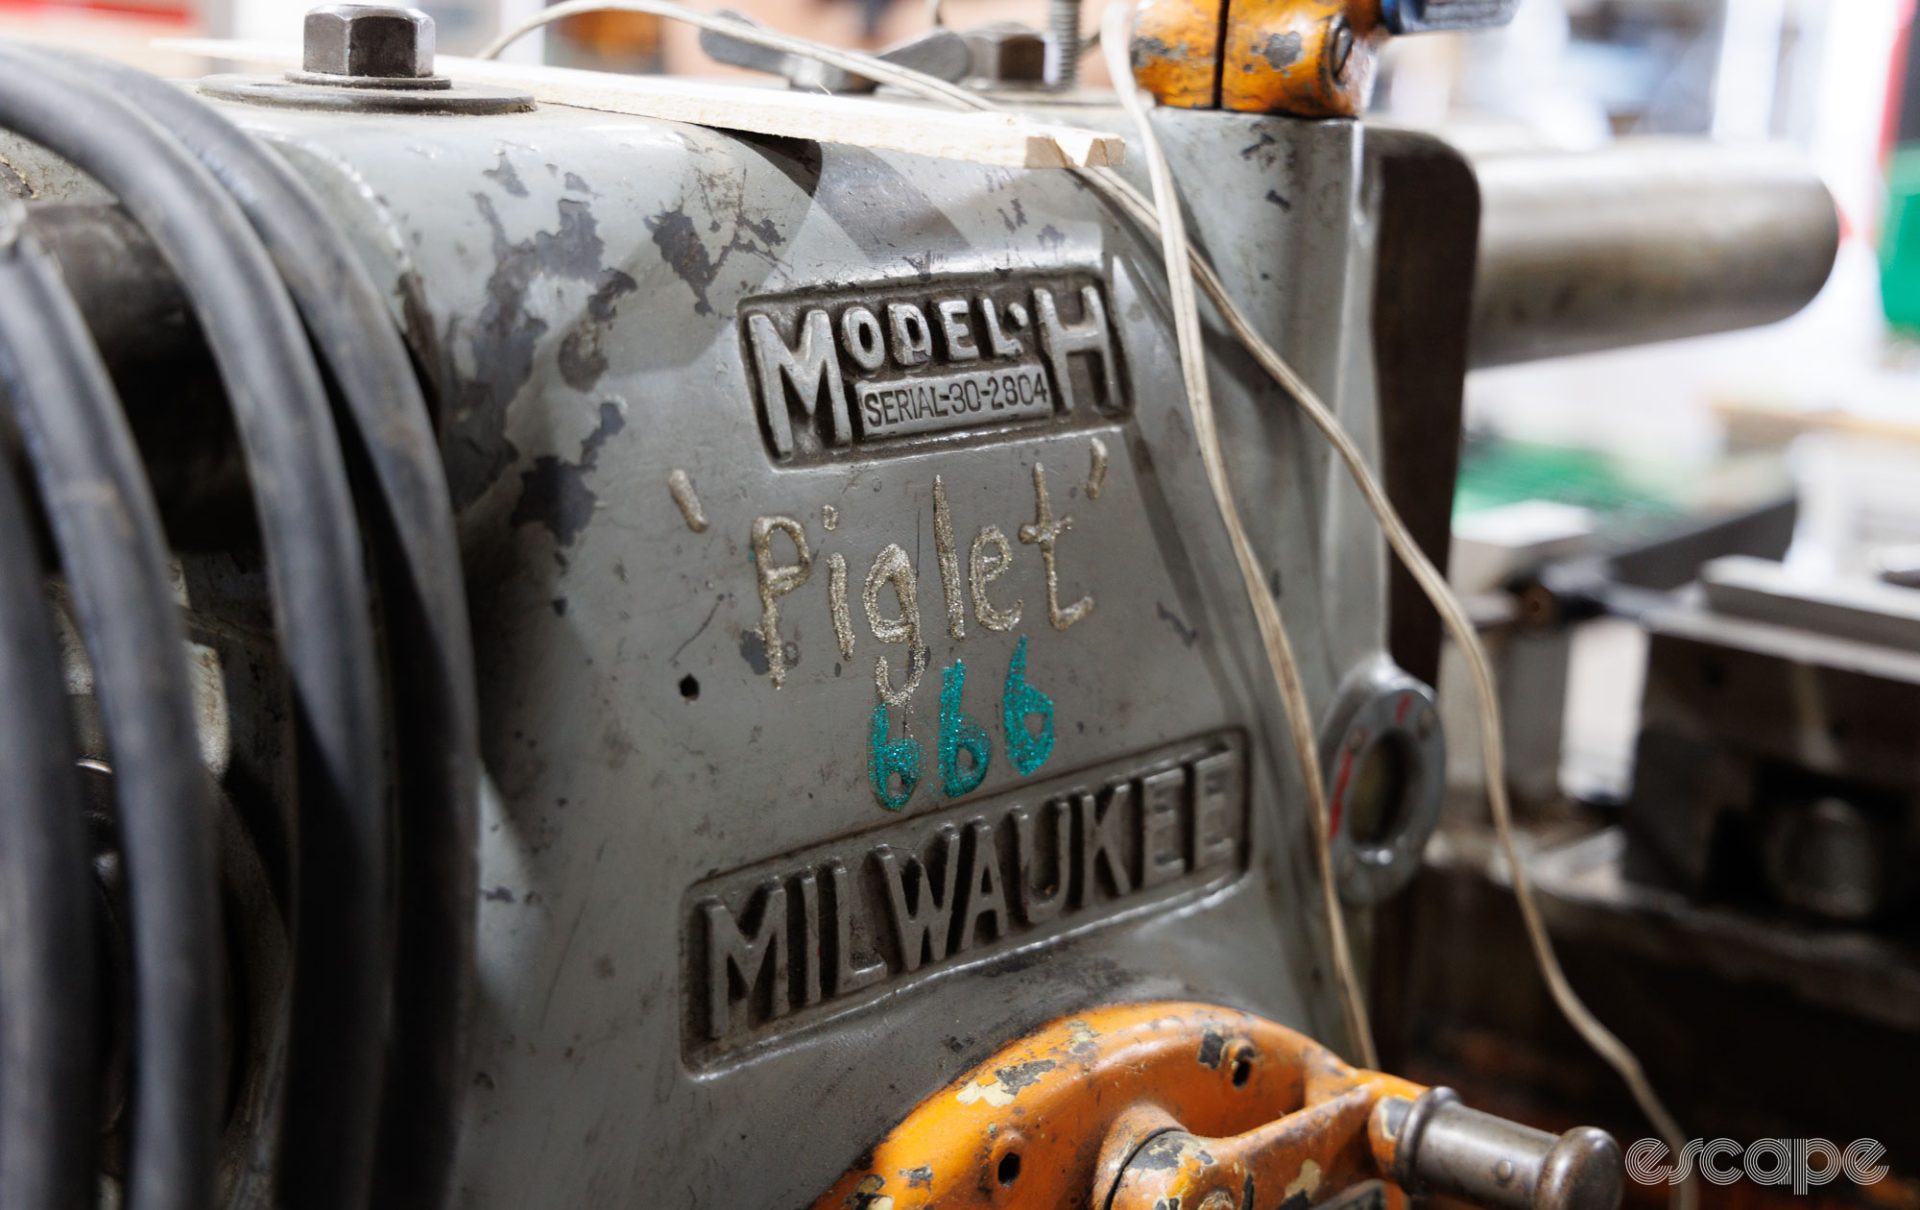 An ancient horizontal mill is shown in close-up. The Milwaukee Model H has obvious signs of long use and the name "Piglet" inscribed in thick silver paint above the numbers "666" in turquoise.